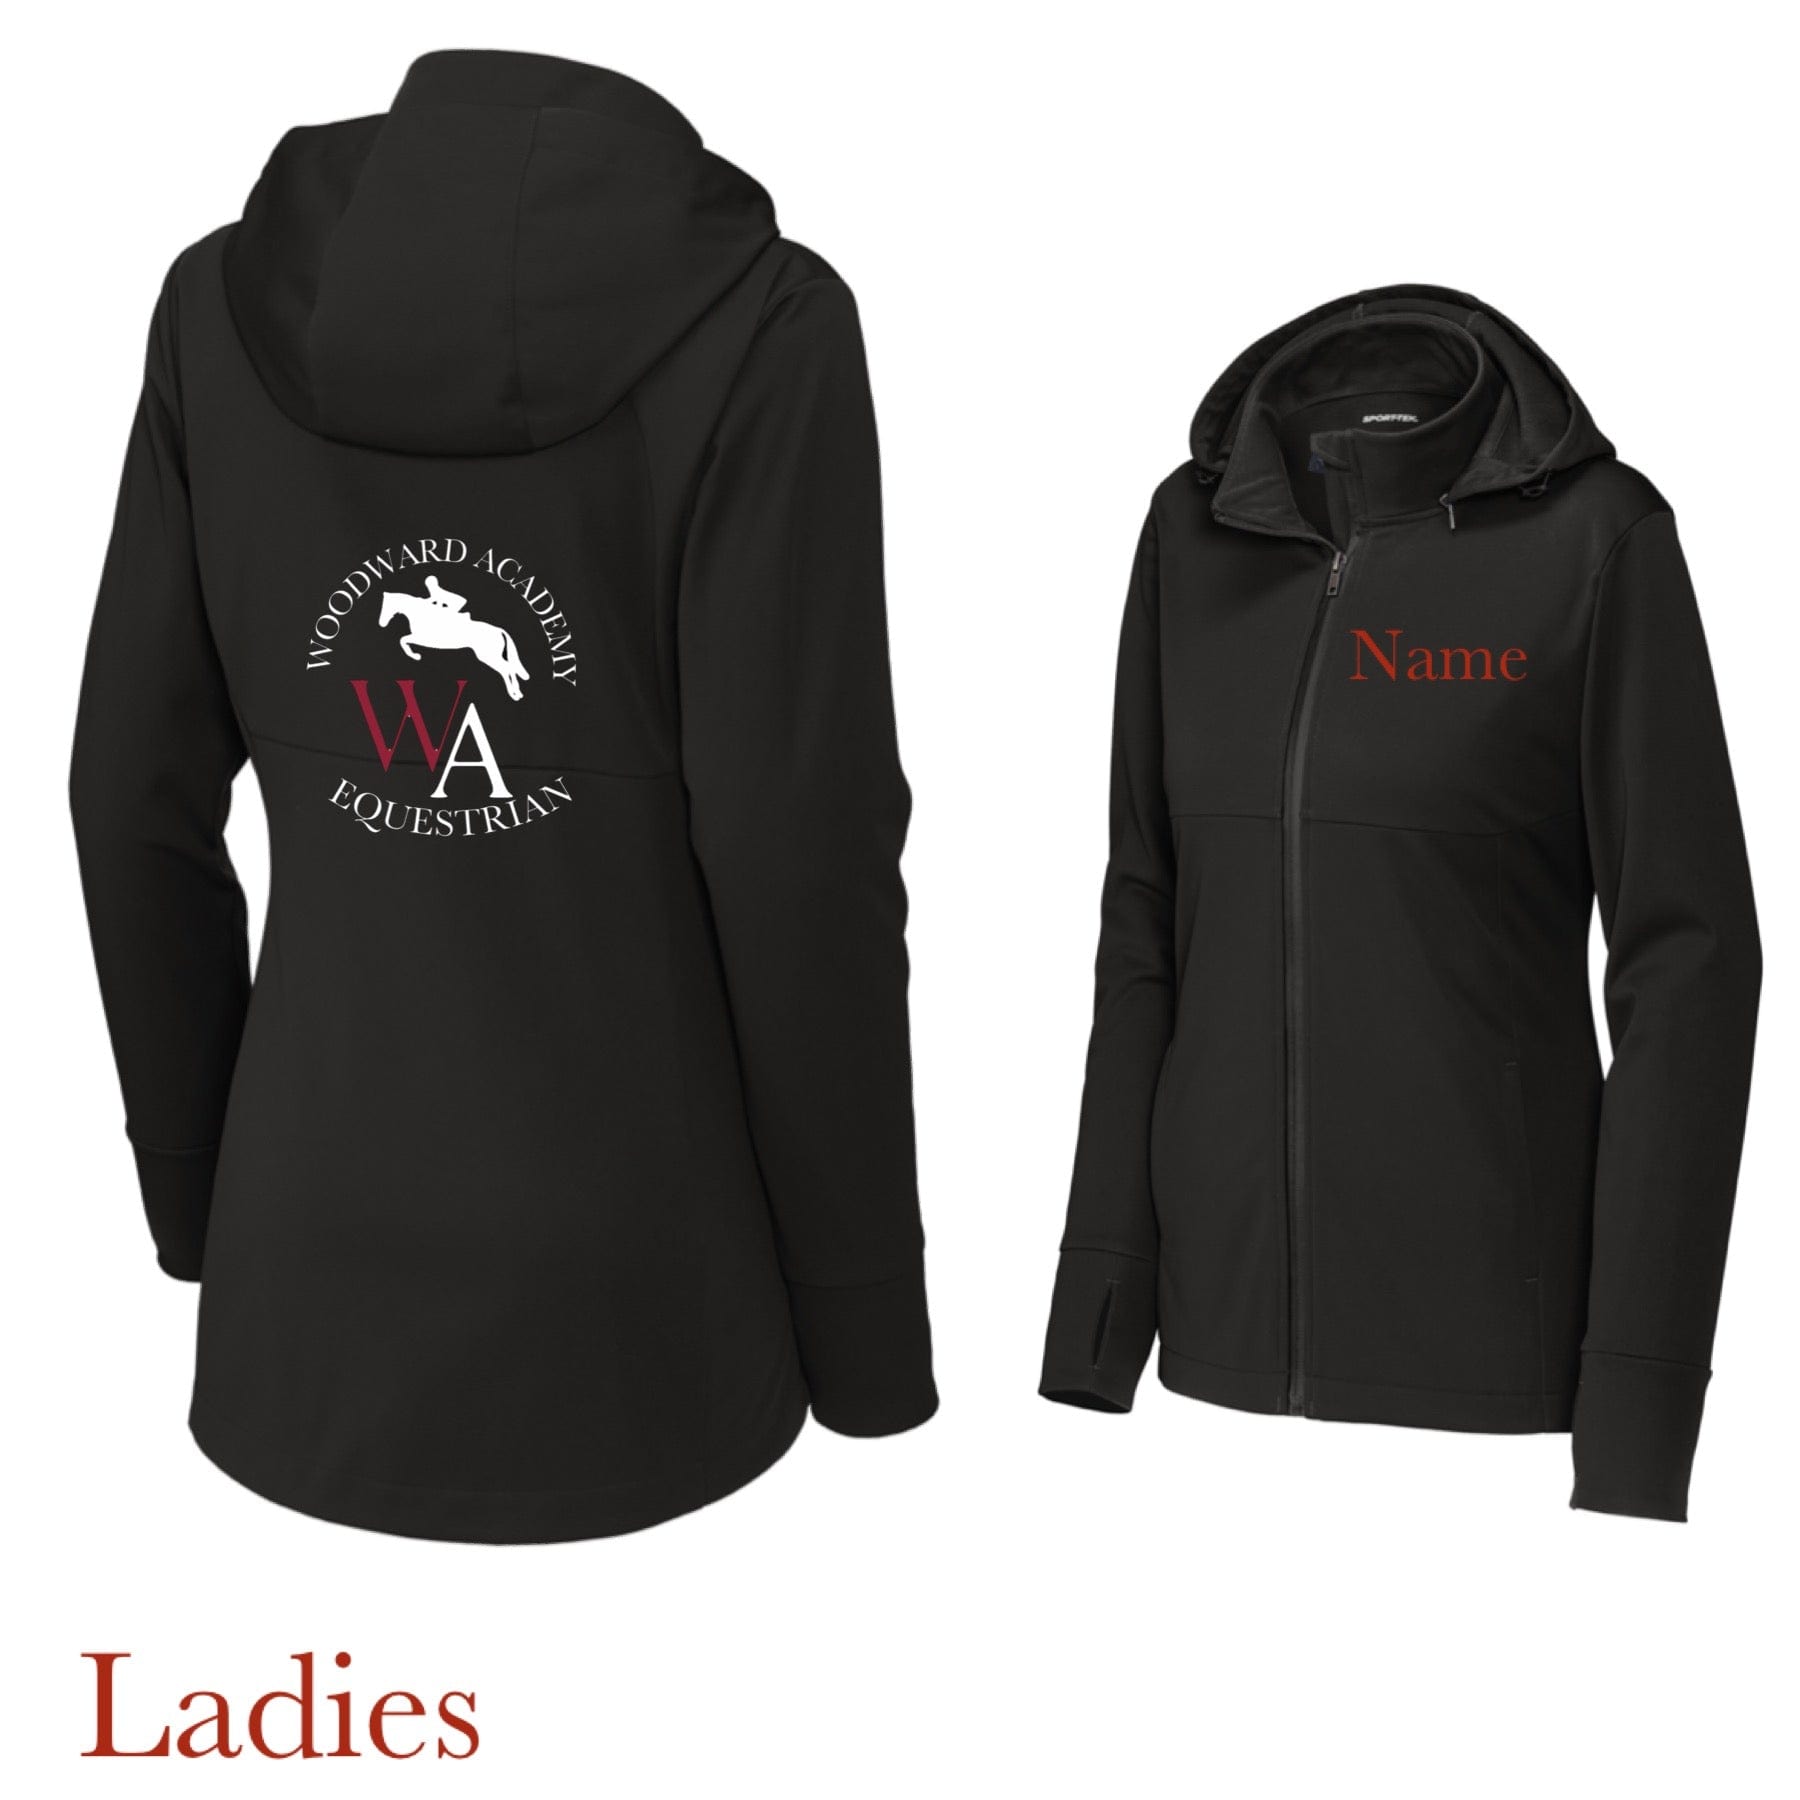 Equestrian Team Apparel Woodward Academy Adult Jacket equestrian team apparel online tack store mobile tack store custom farm apparel custom show stable clothing equestrian lifestyle horse show clothing riding clothes horses equestrian tack store